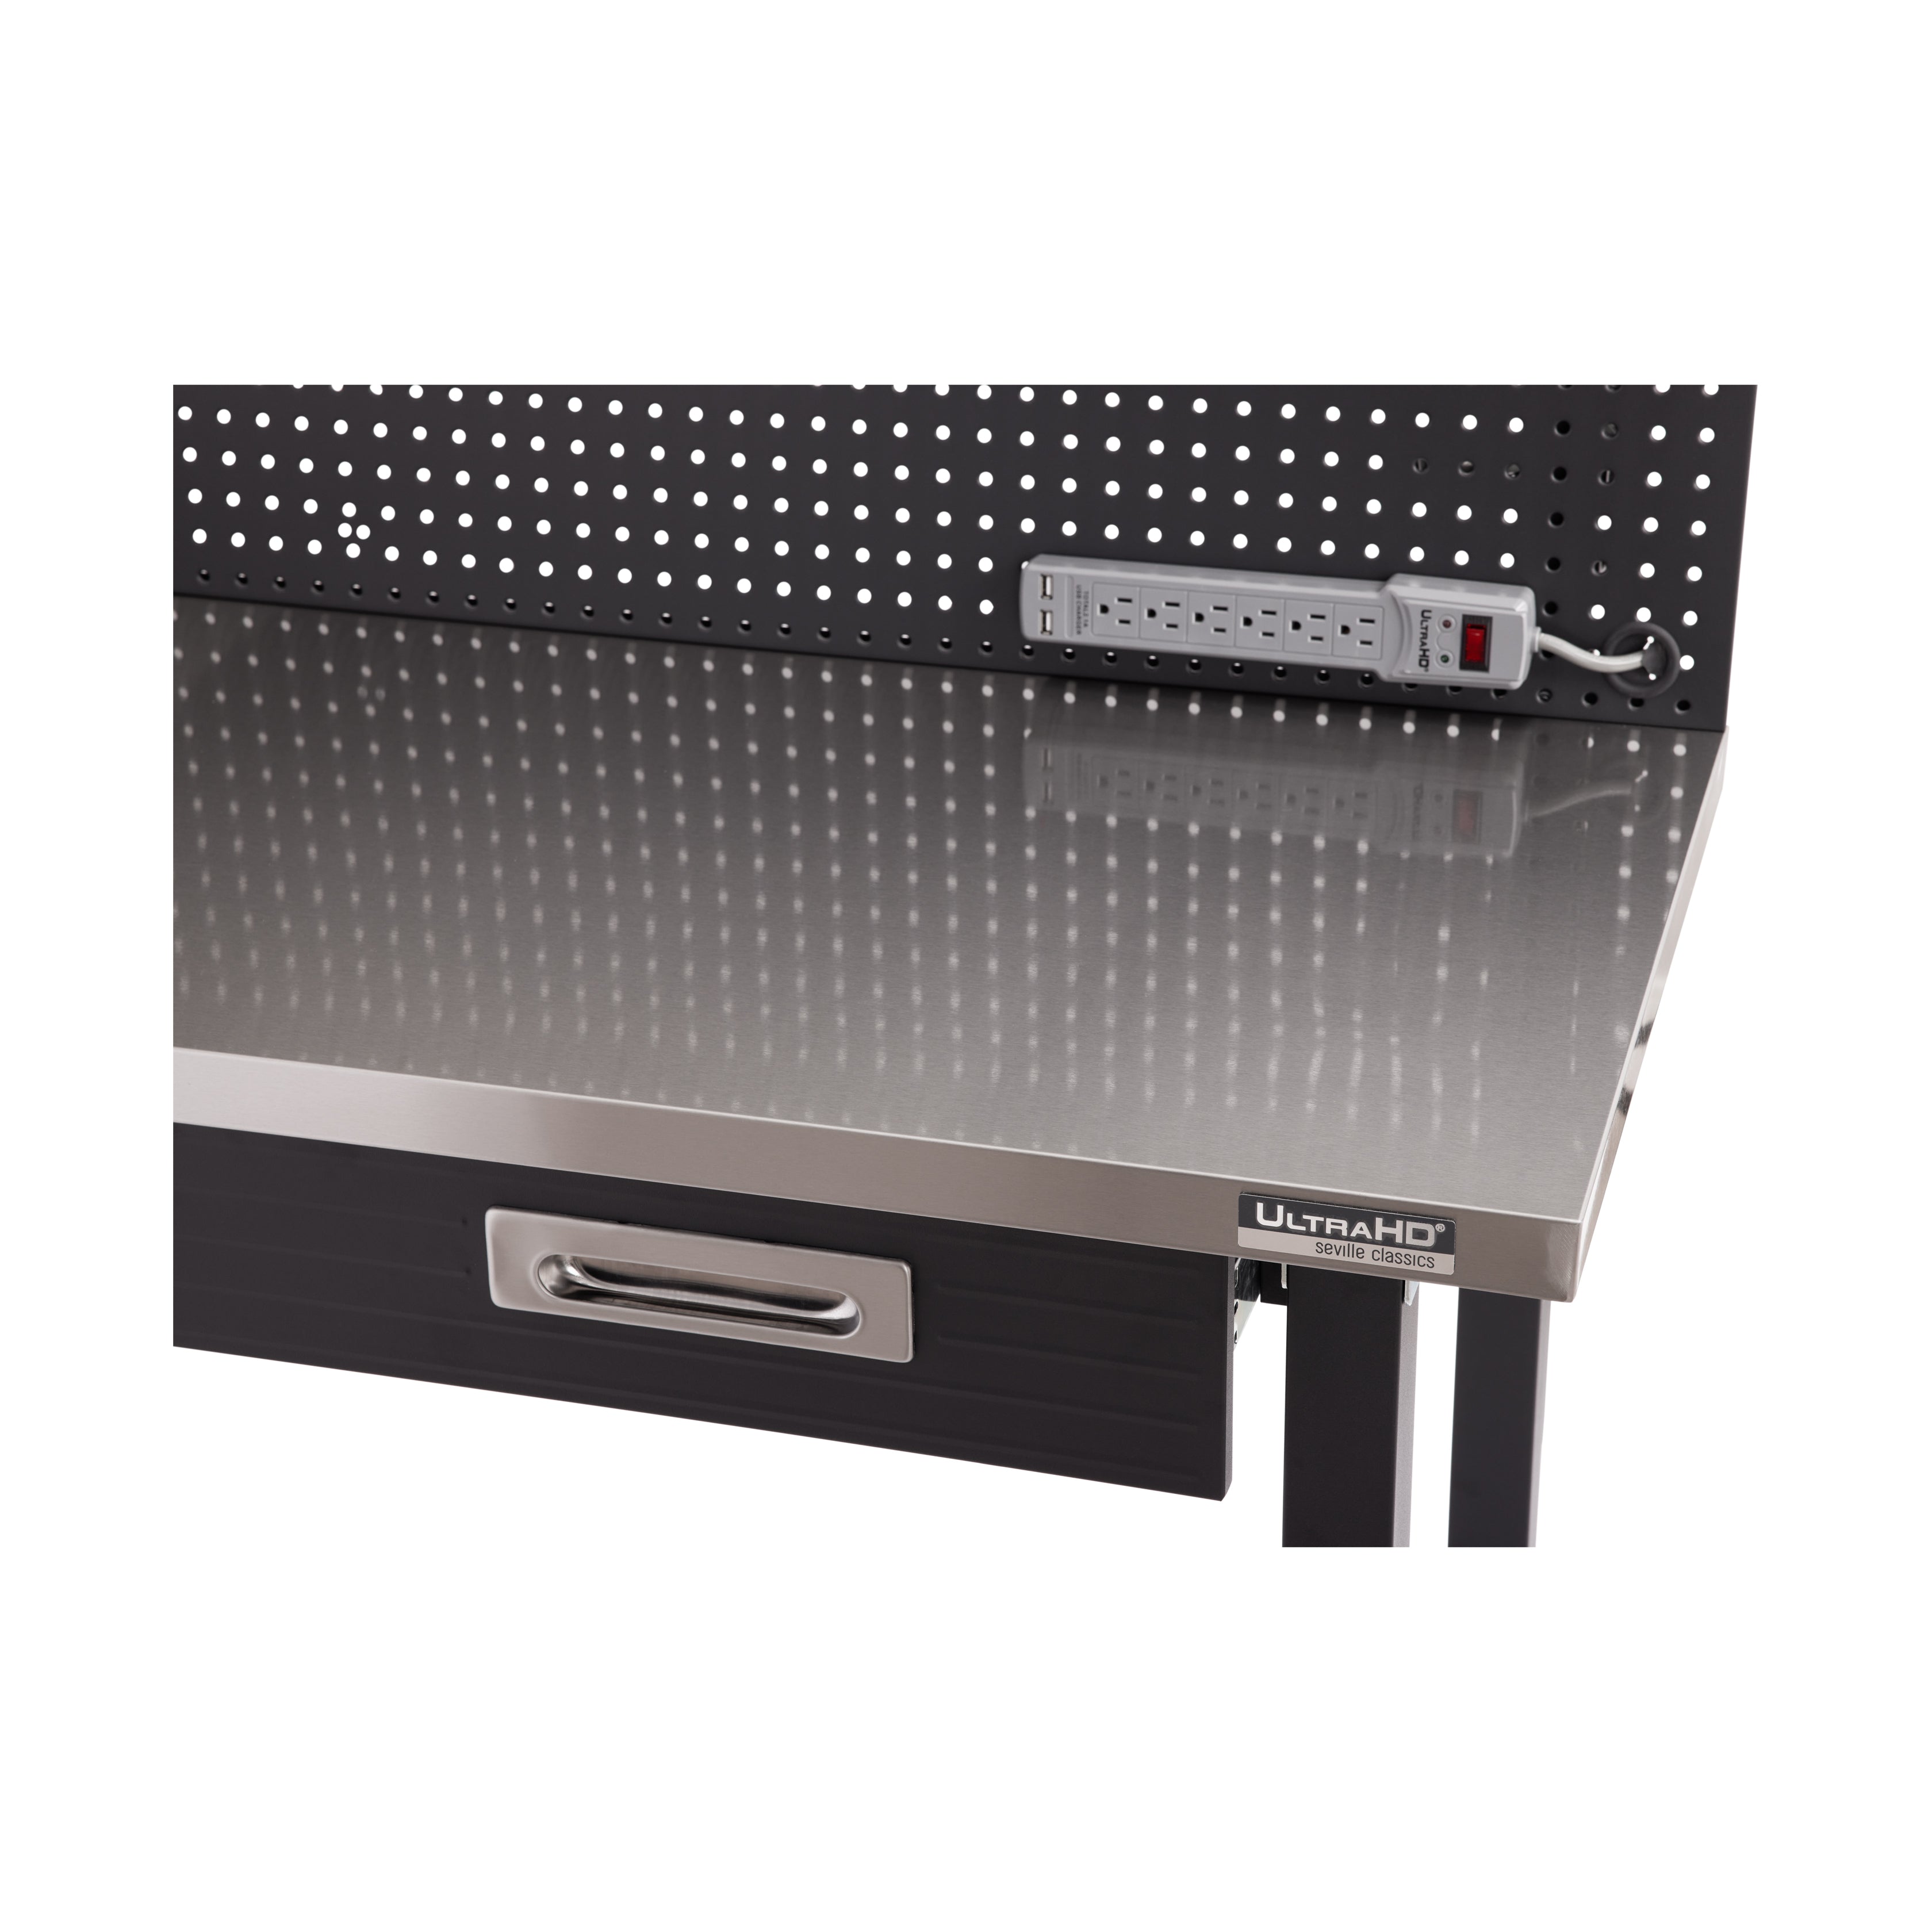 Seville Classics UltraHD Lighted Stainless Steel Top Workcenter